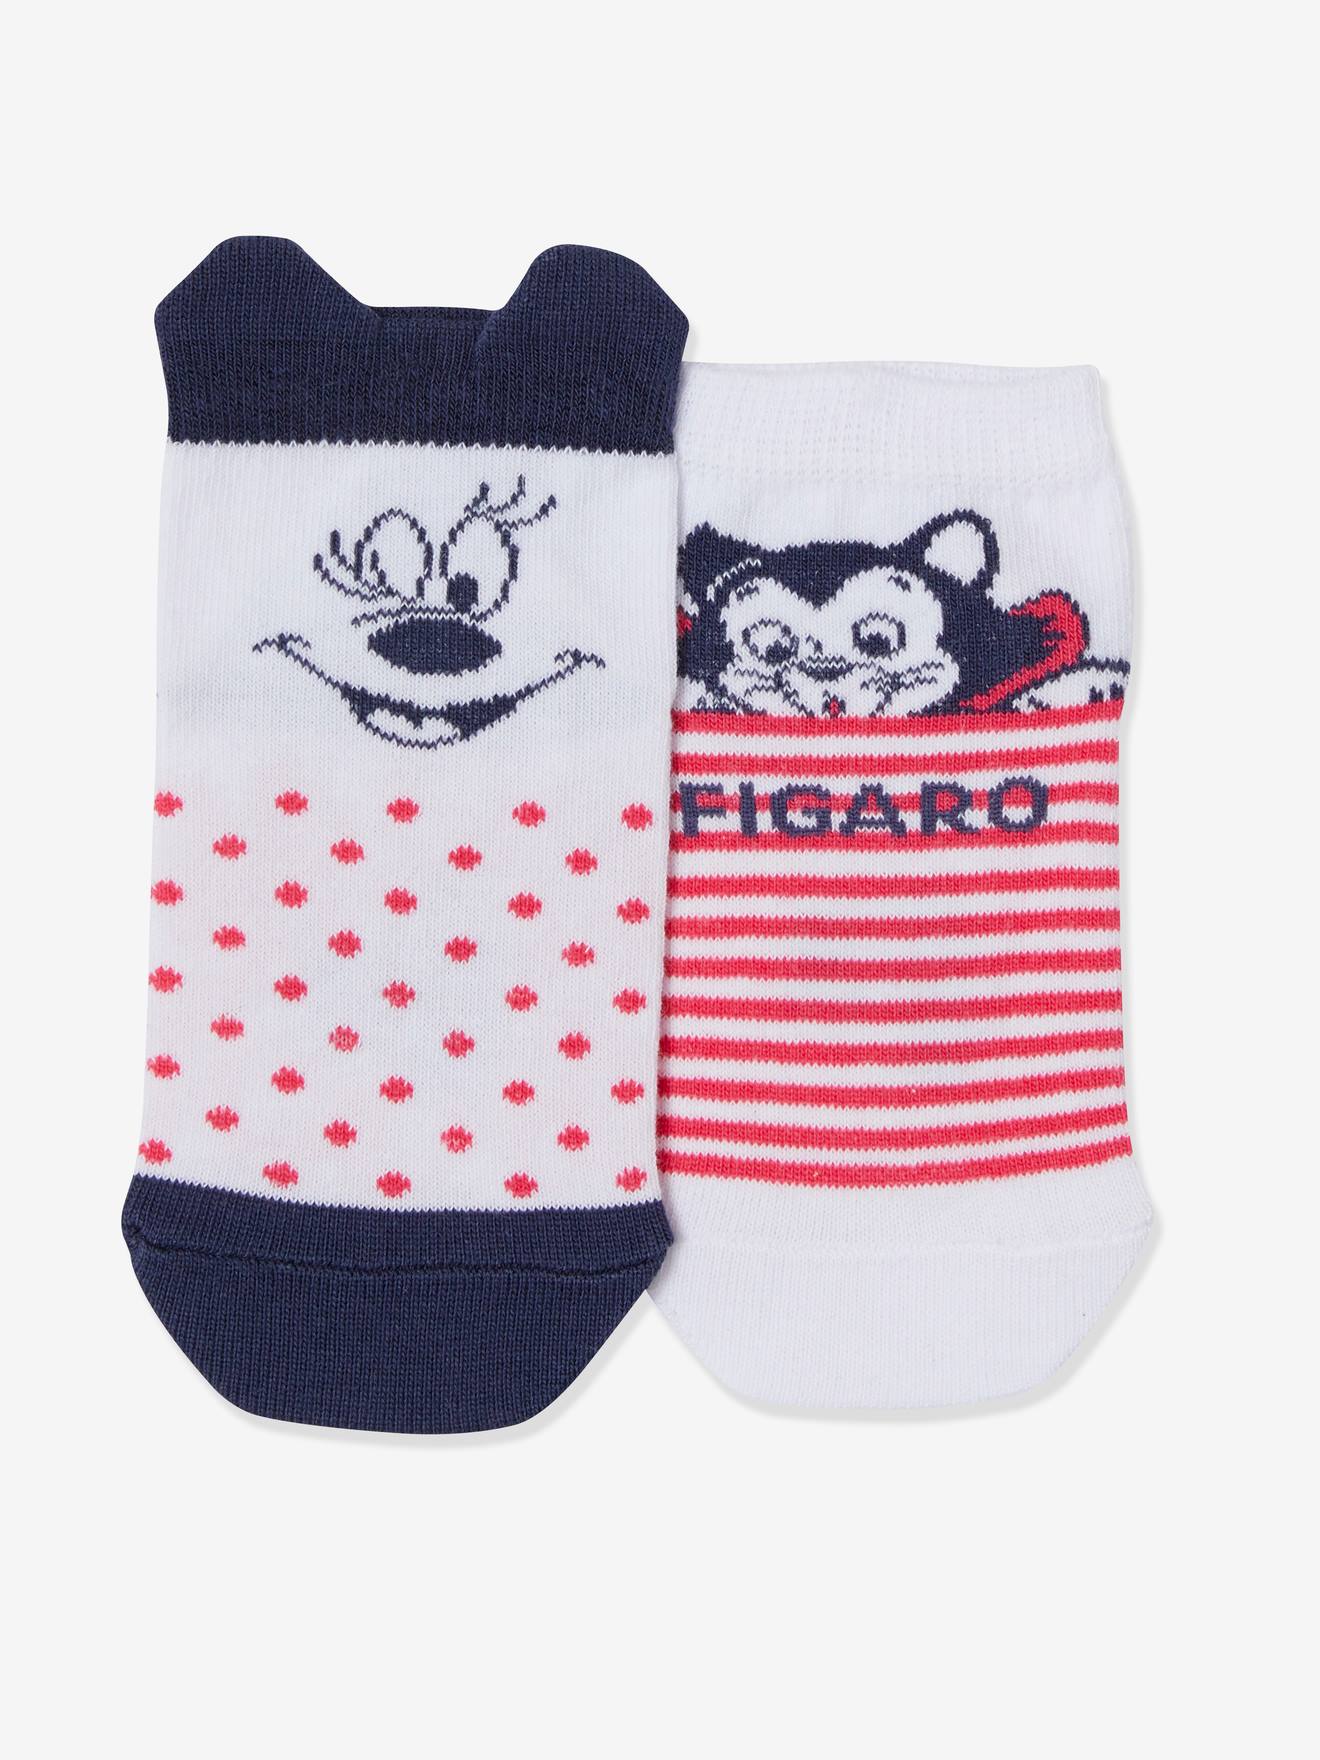 Minnie Mouse Girls Socks 5 Pack Mixed Colour Mixed 